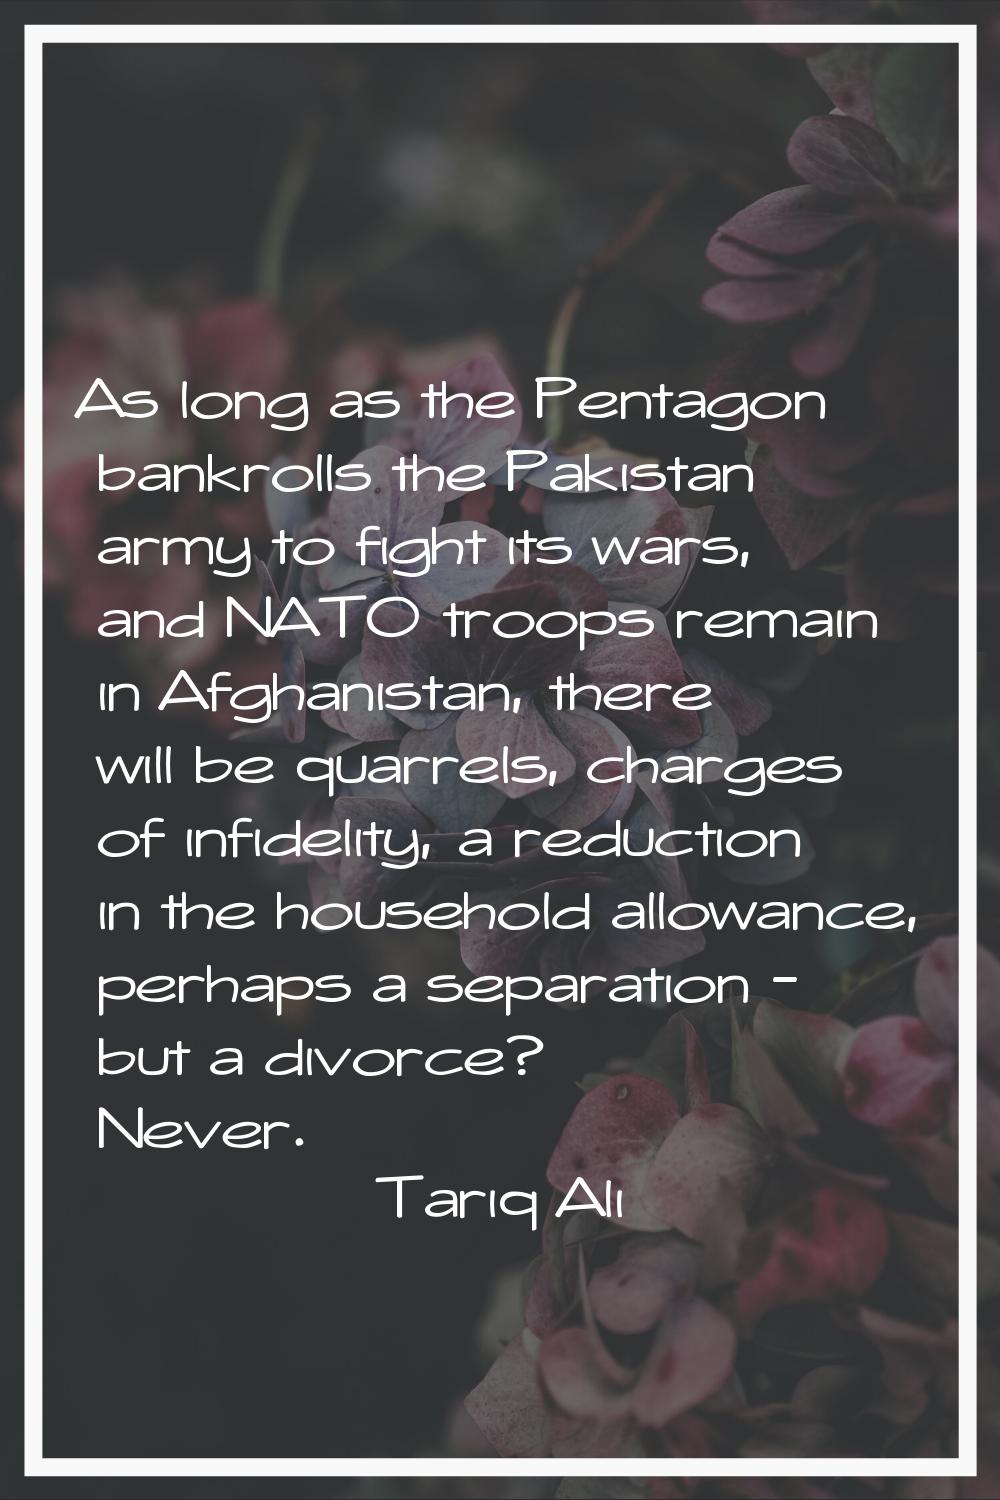 As long as the Pentagon bankrolls the Pakistan army to fight its wars, and NATO troops remain in Af